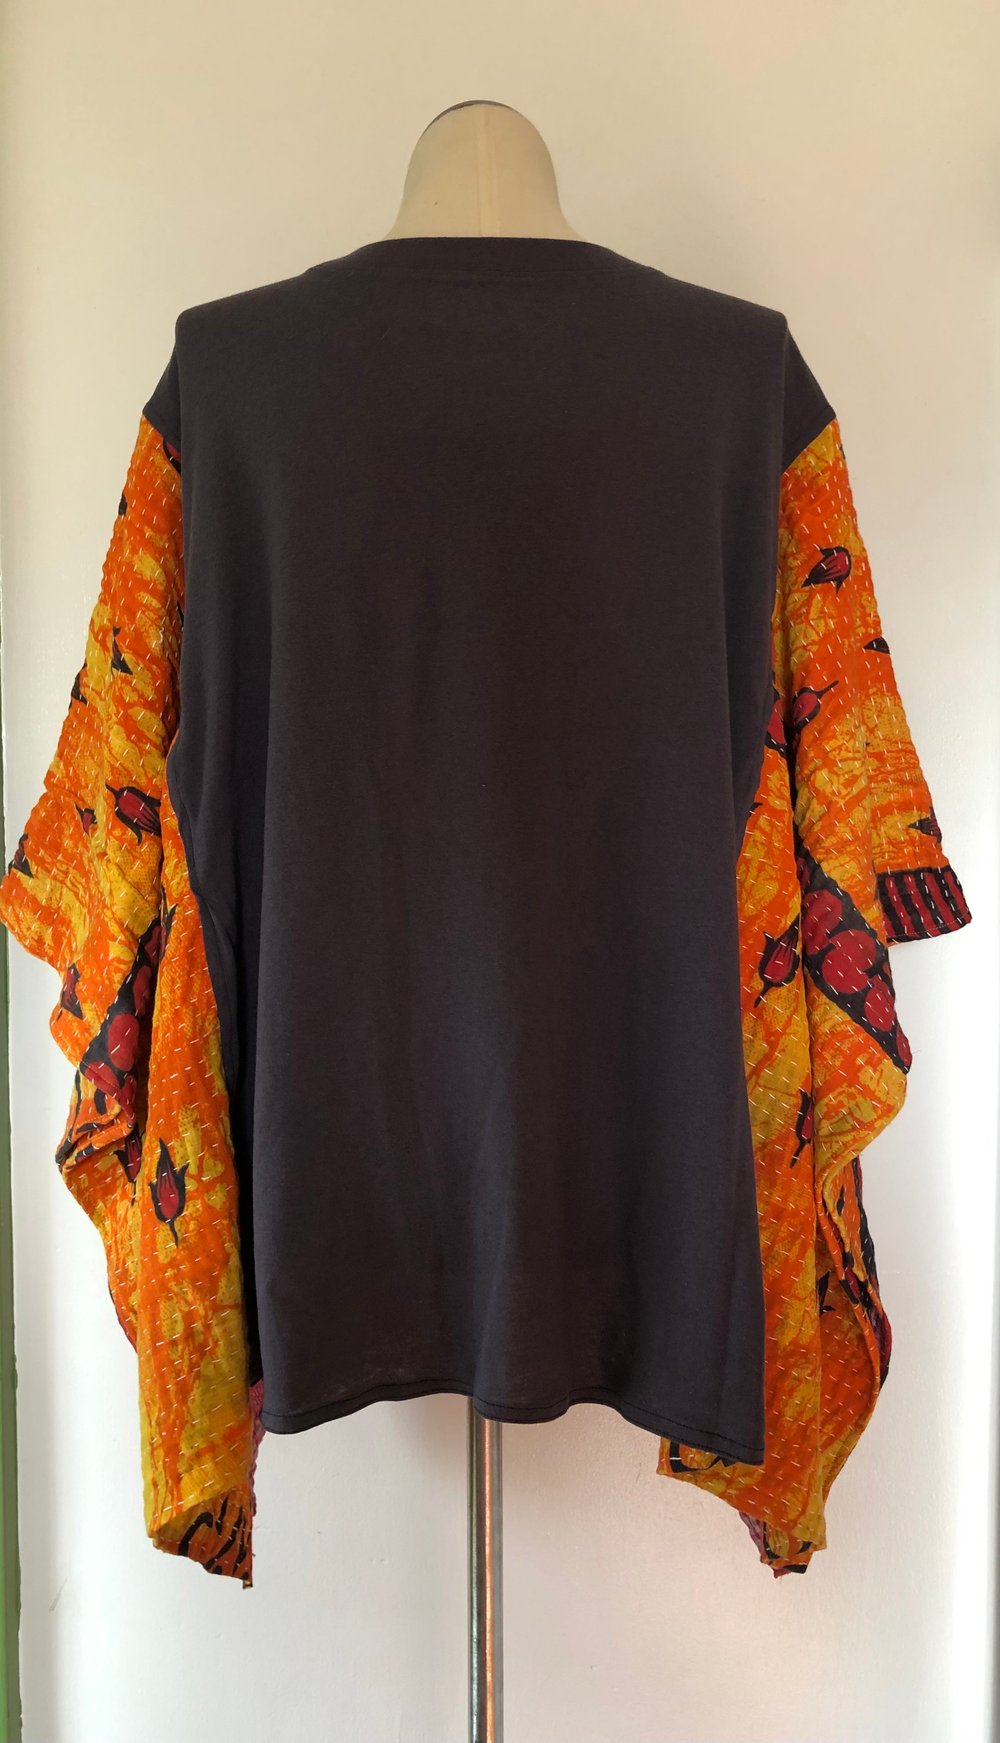 Upcycled “KISS” vintage quilt poncho